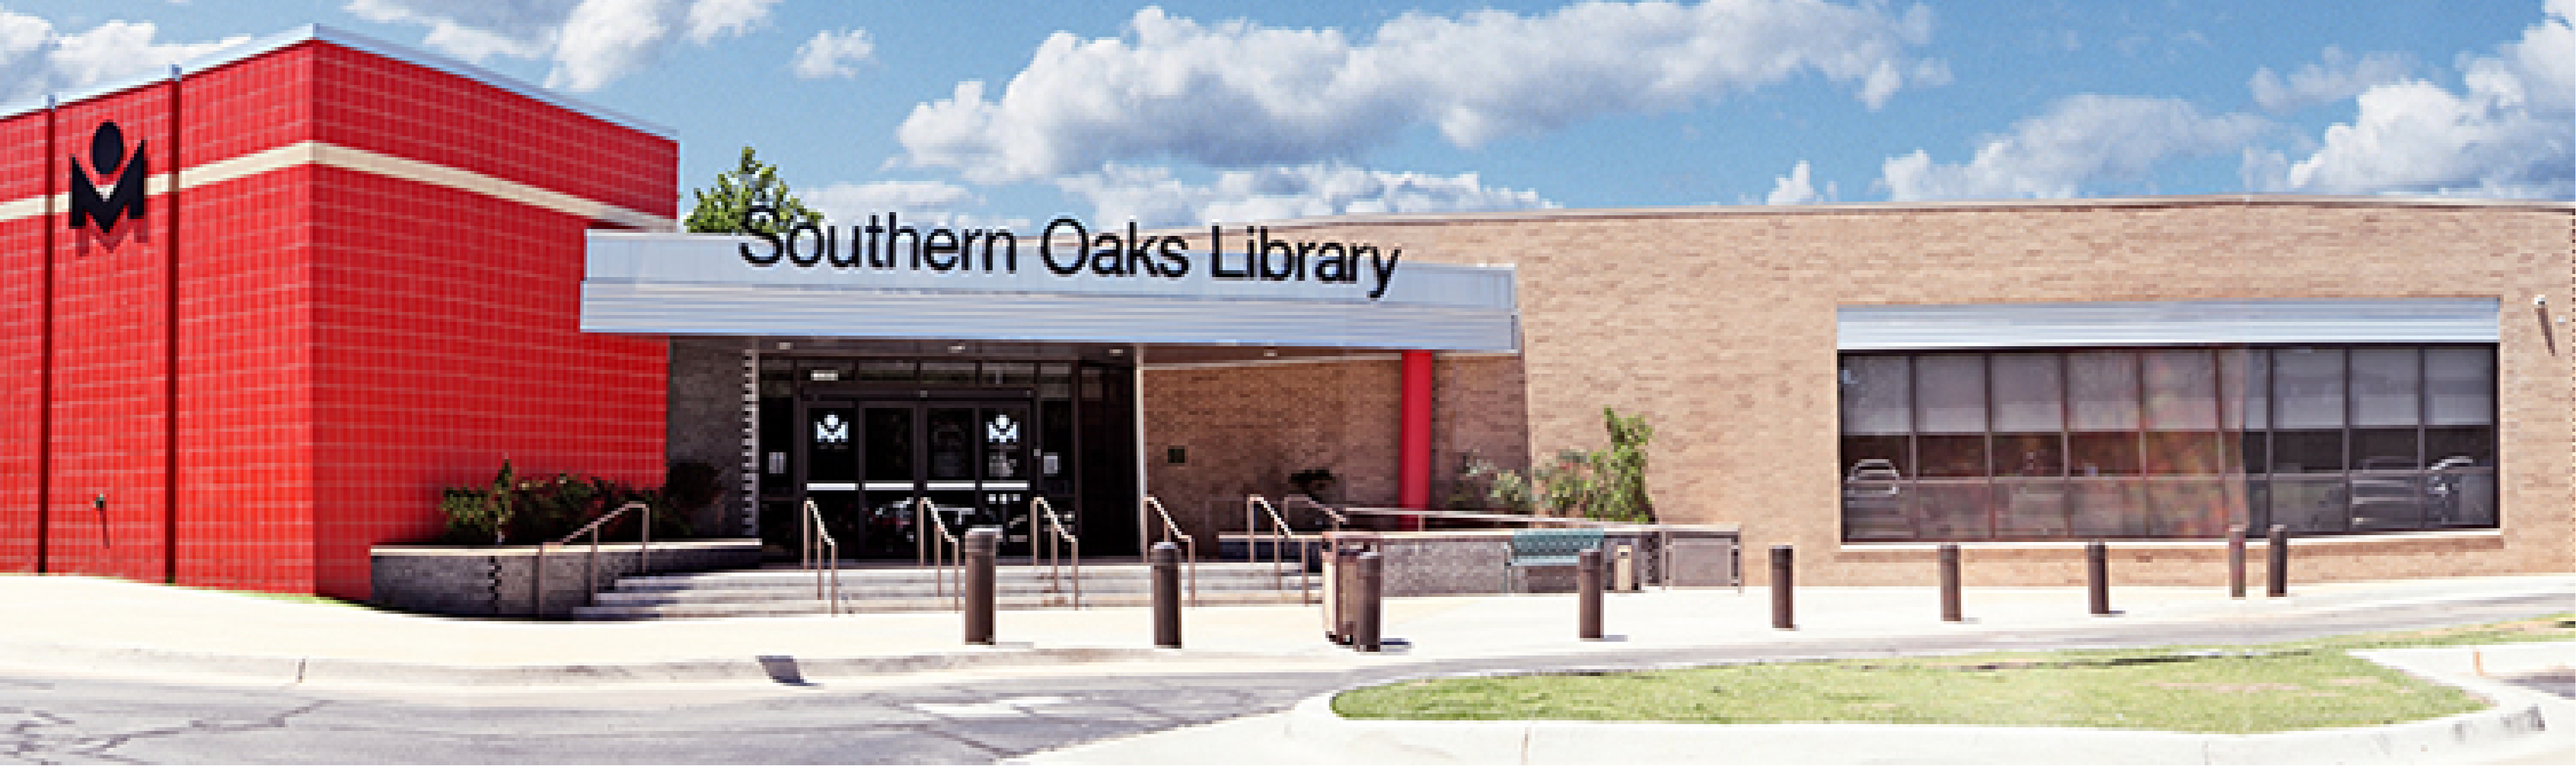 Southern Oaks Library